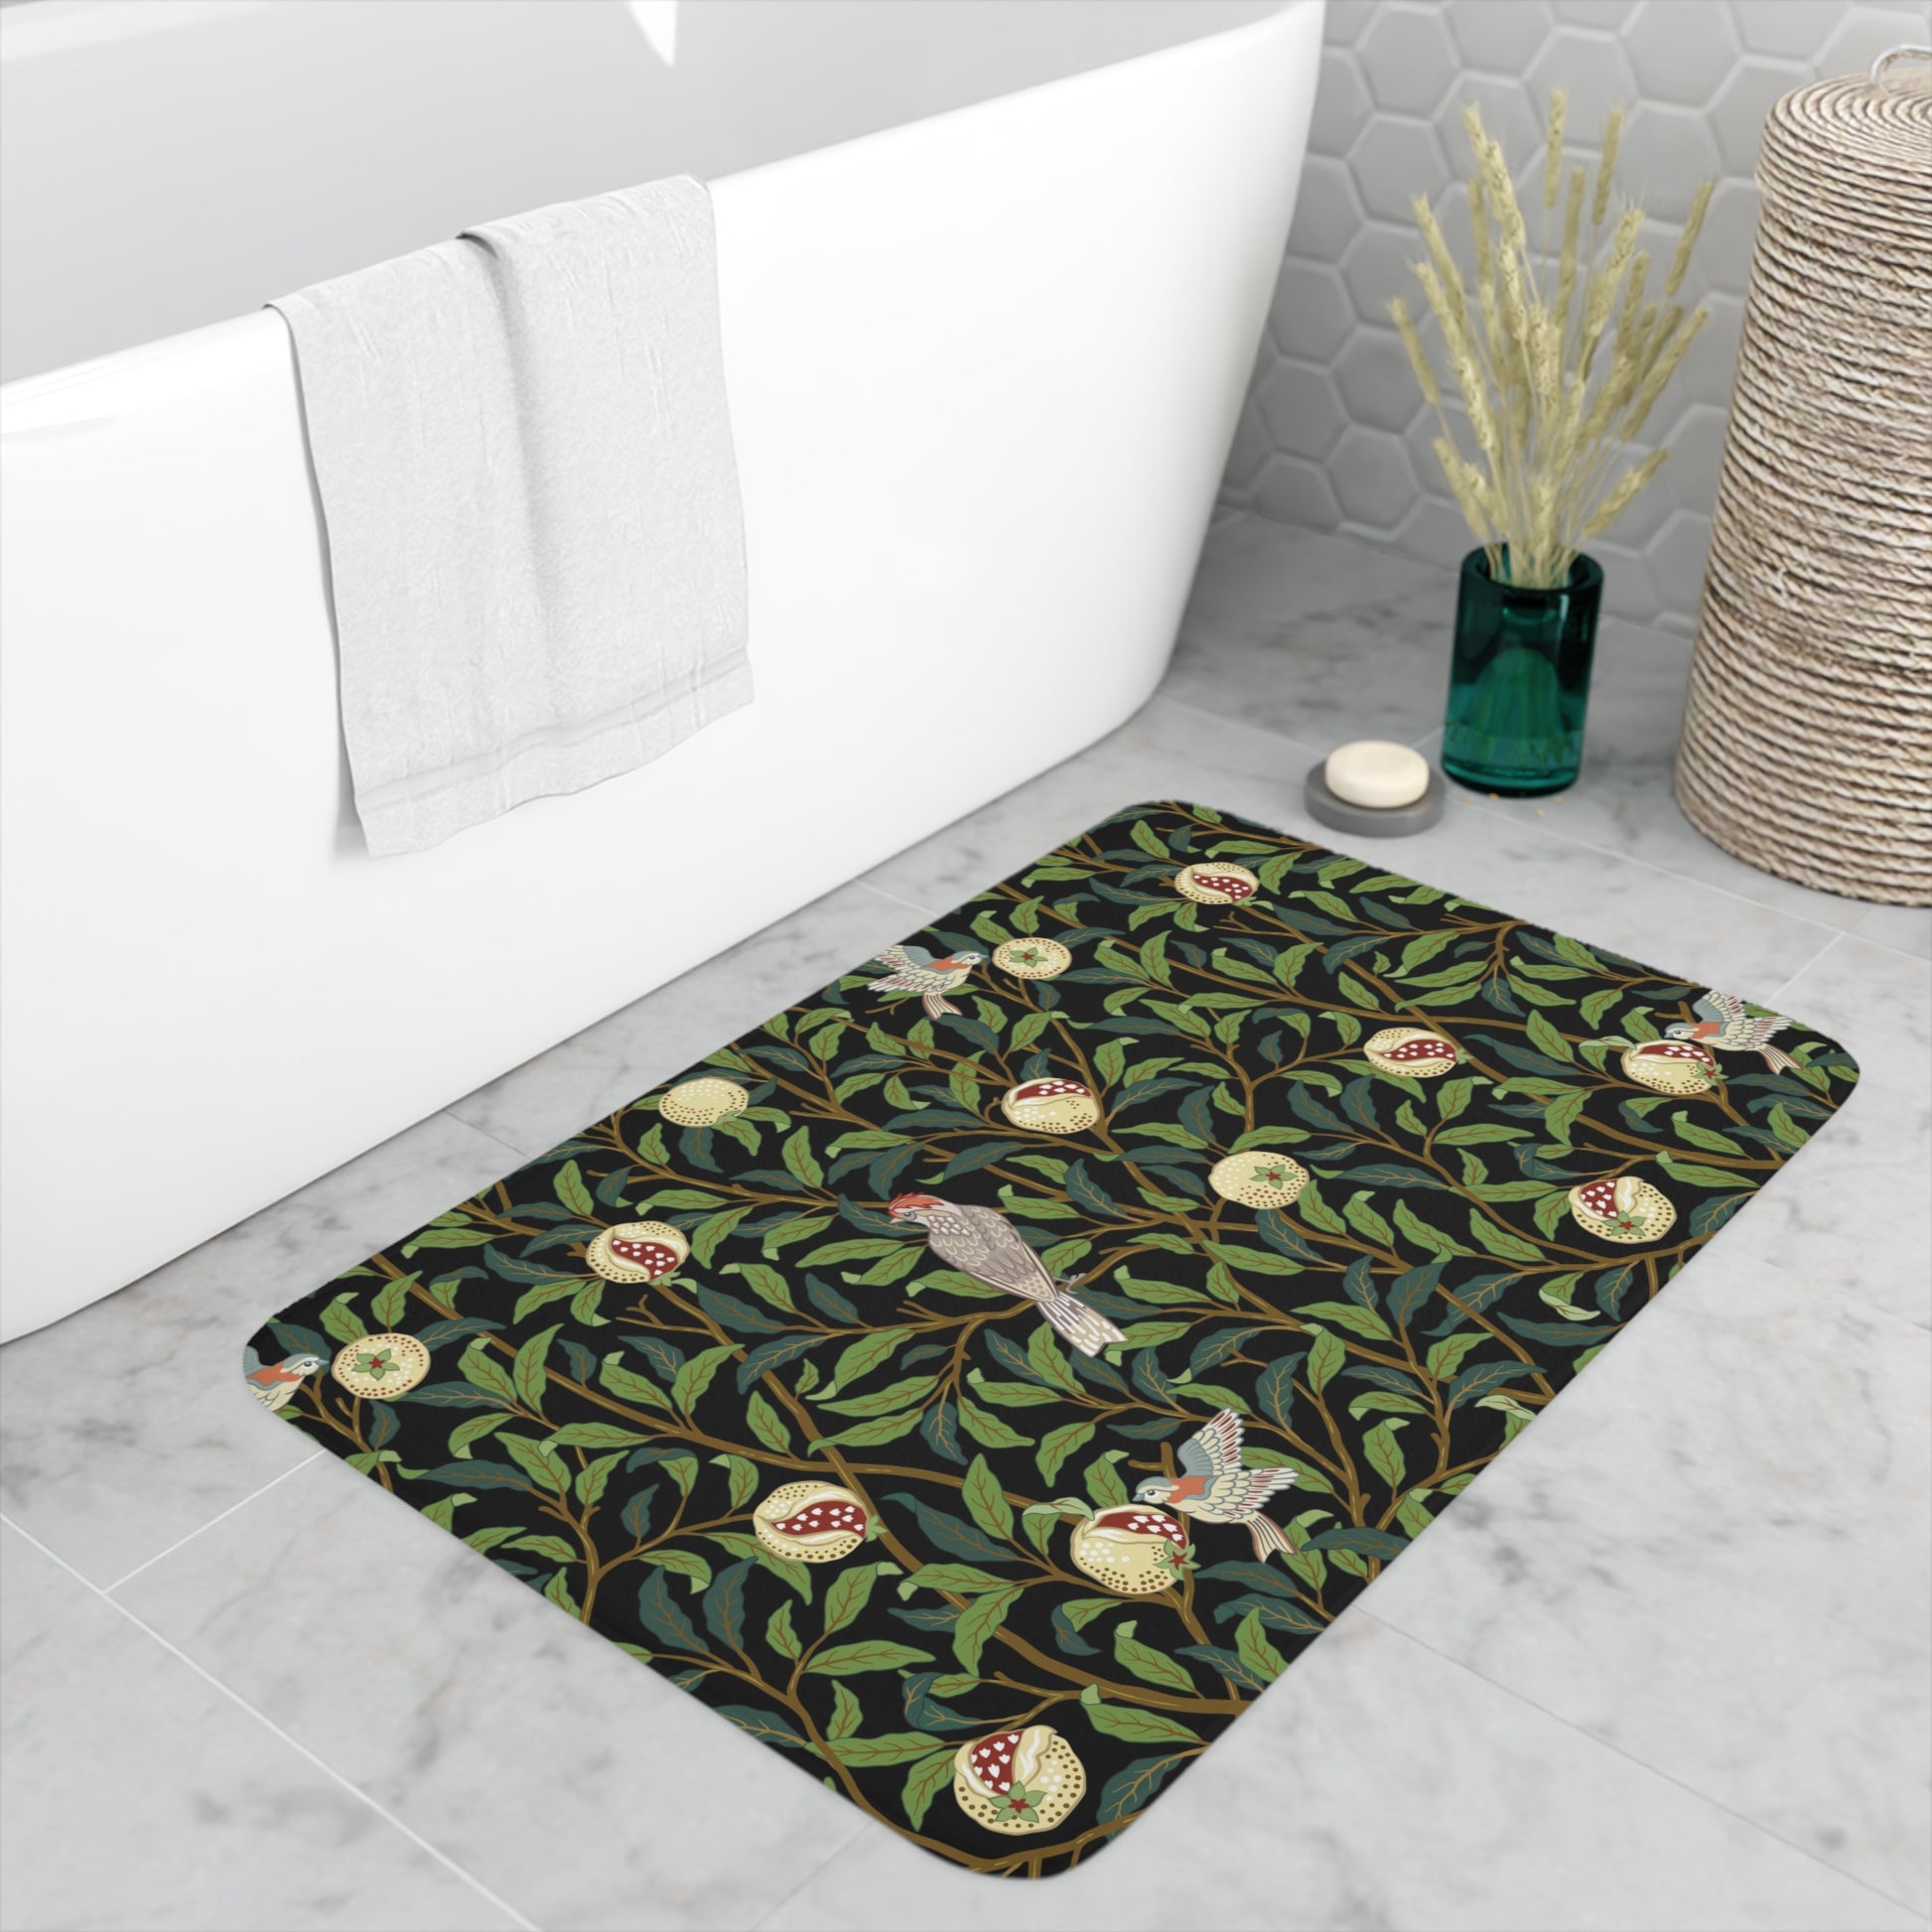 william-morris-co-memory-foam-bath-mat-bird-and-pomegranate-collection-onyx-5